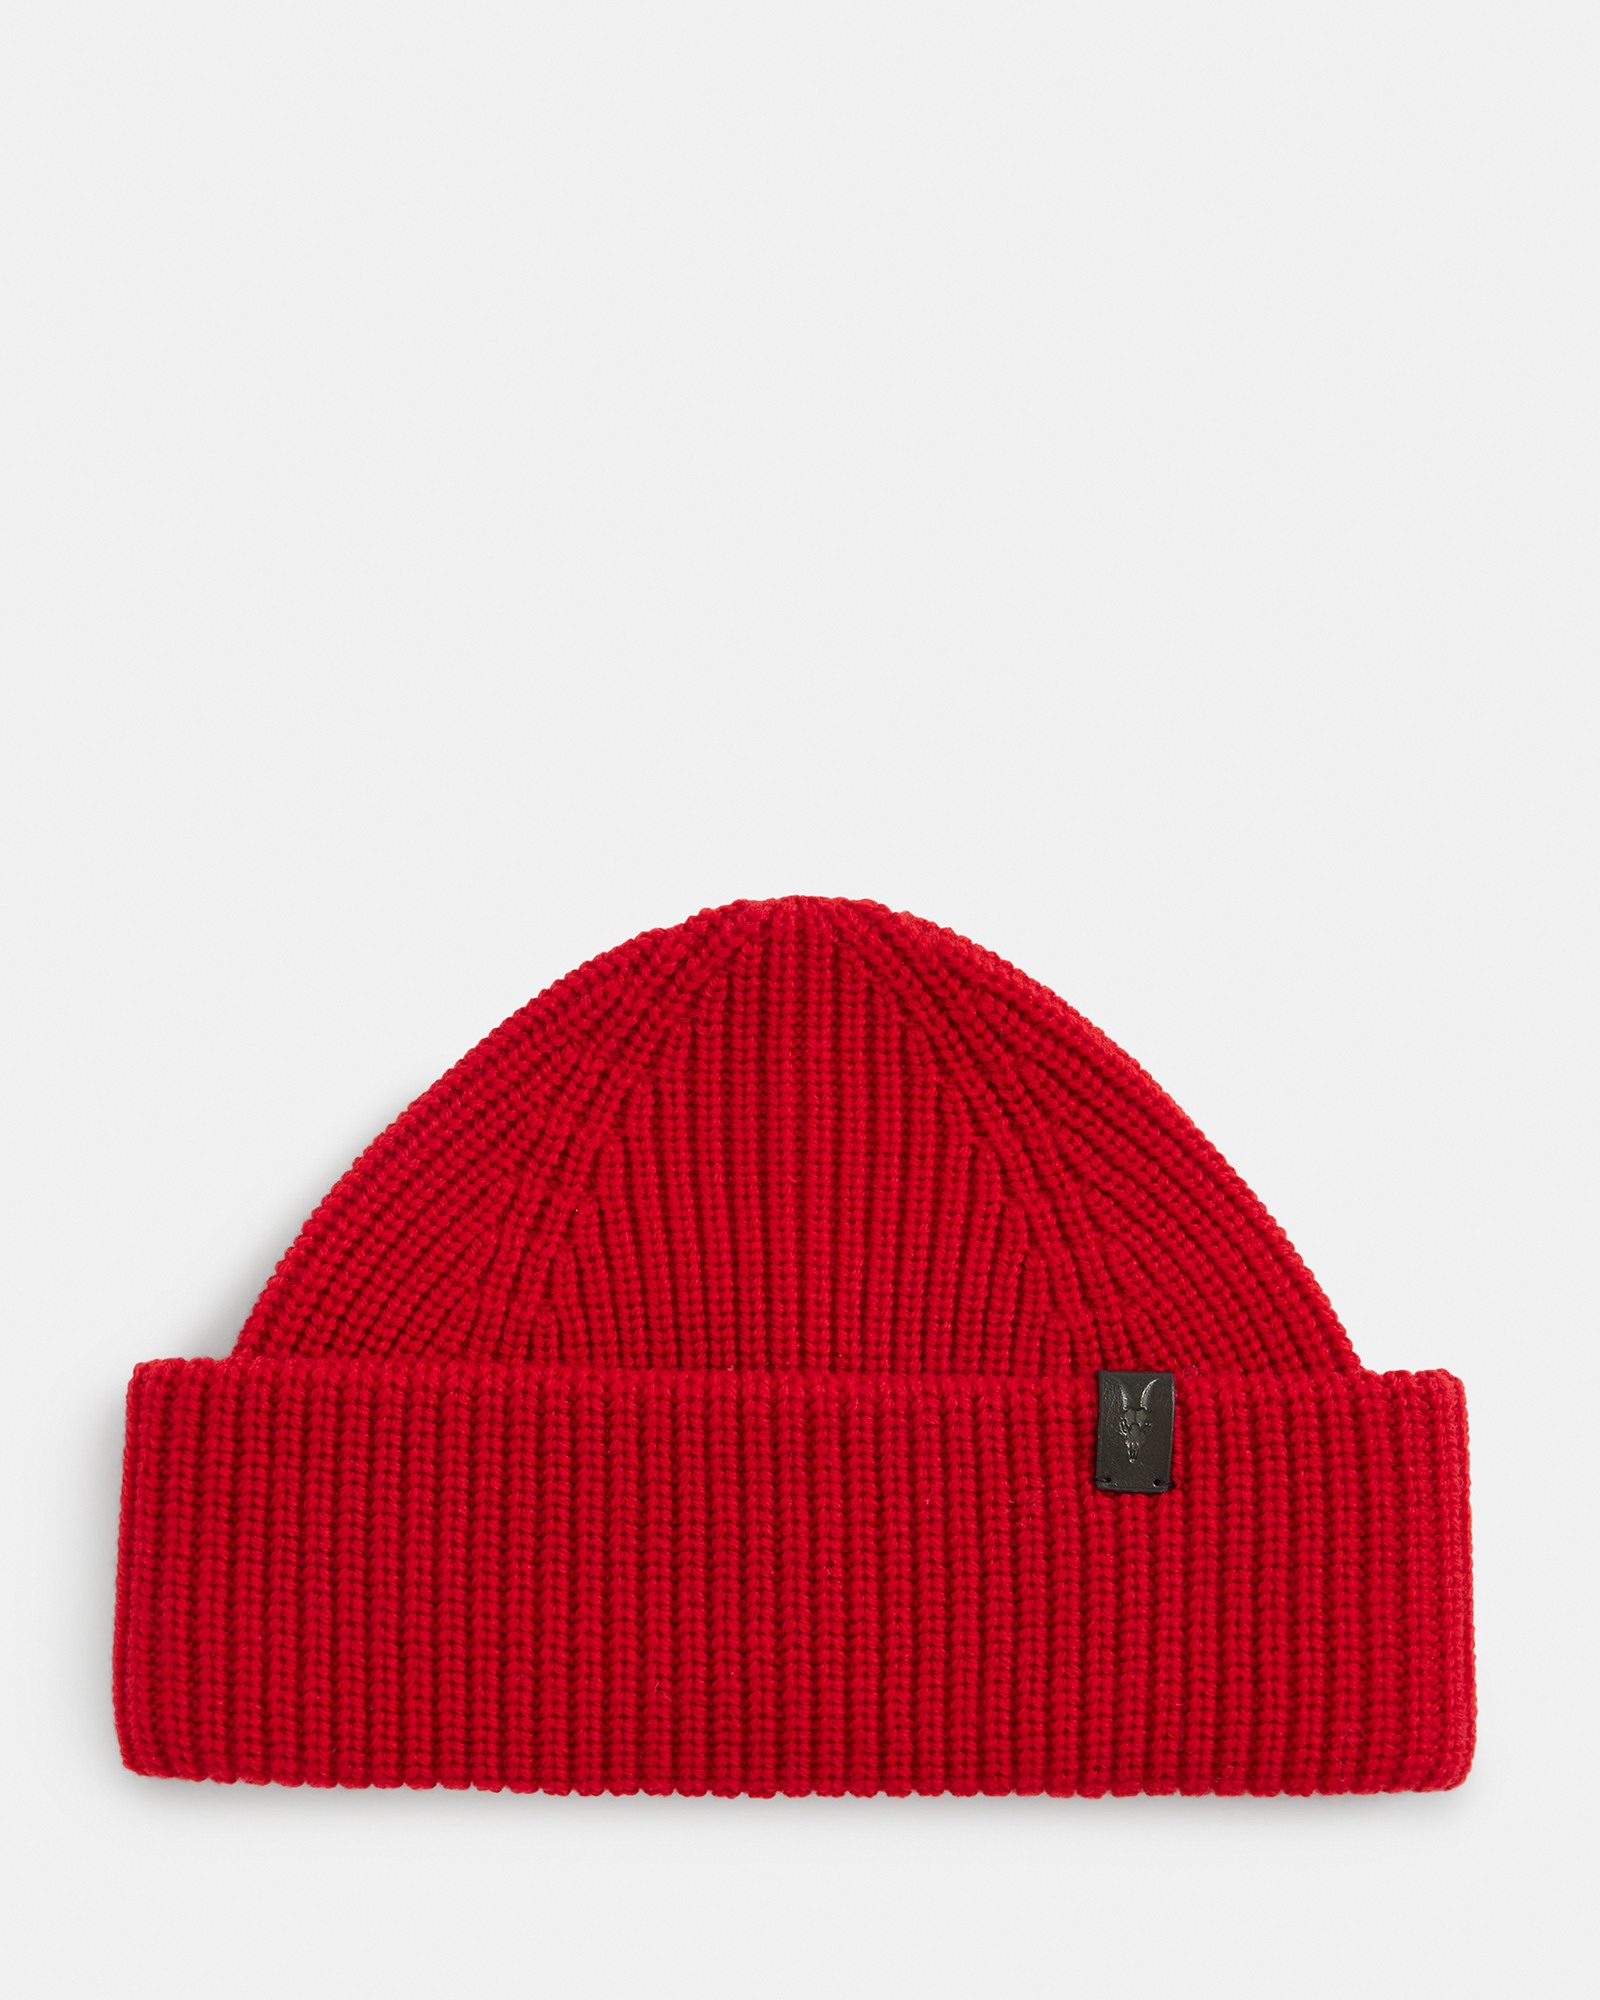 US Merino Cuff RED | PYROPE Beanie Up Turned Wool ALLSAINTS